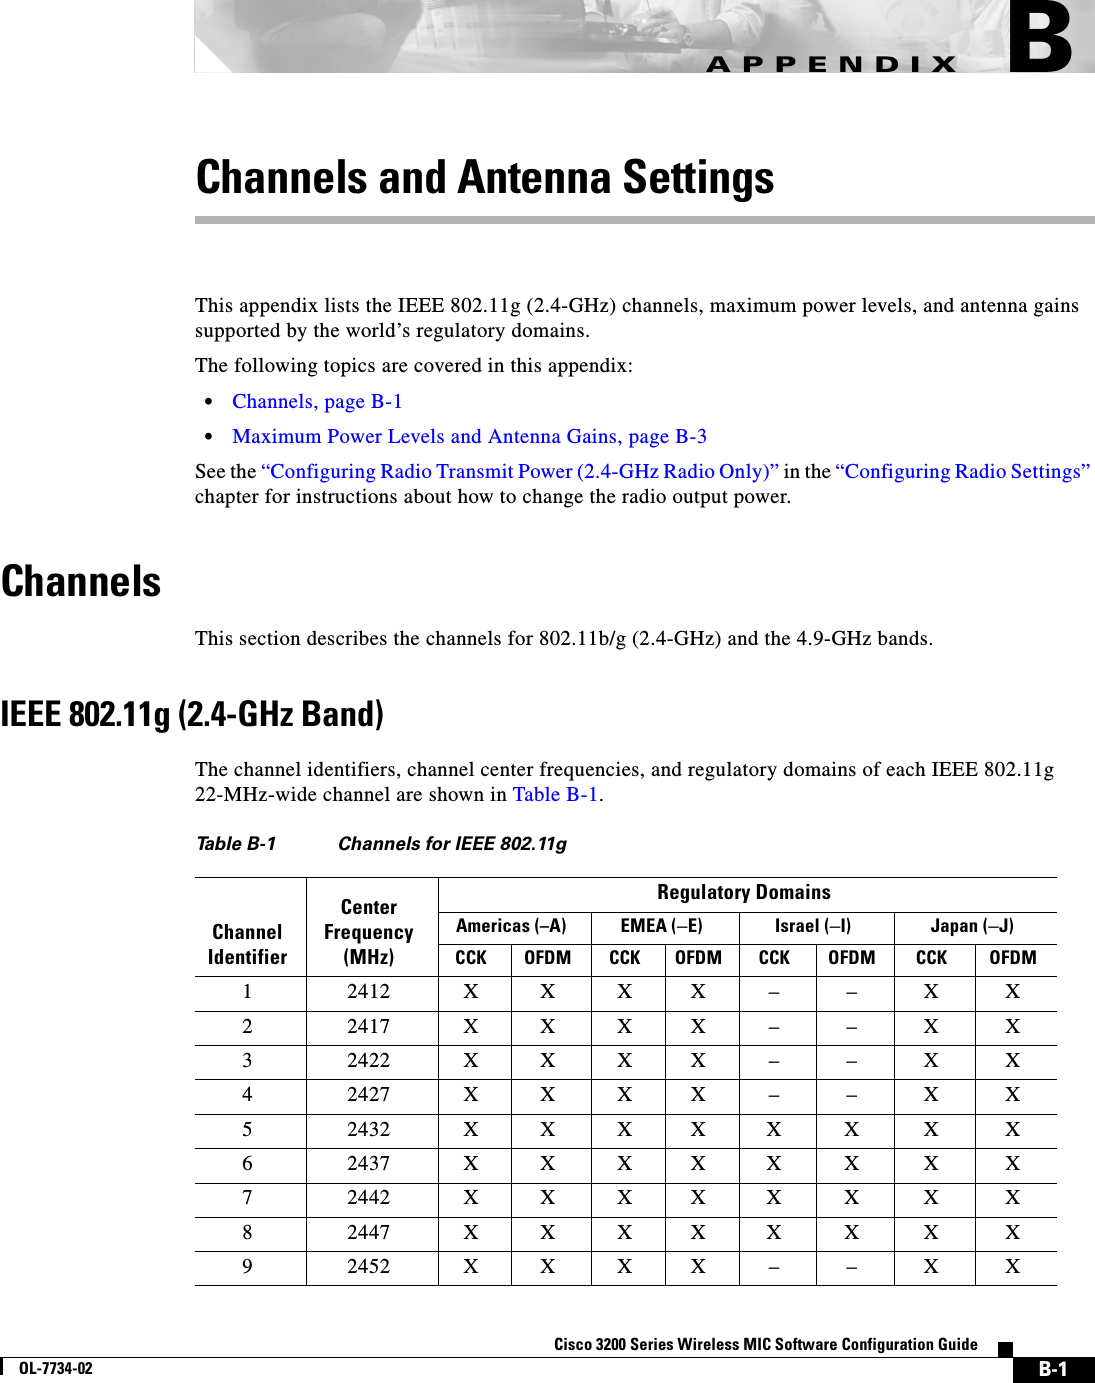  B-1Cisco 3200 Series Wireless MIC Software Configuration GuideOL-7734-02APPENDIXBChannels and Antenna SettingsThis appendix lists the IEEE 802.11g (2.4-GHz) channels, maximum power levels, and antenna gains supported by the world’s regulatory domains. The following topics are covered in this appendix:•Channels, page B-1•Maximum Power Levels and Antenna Gains, page B-3See the “Configuring Radio Transmit Power (2.4-GHz Radio Only)” in the “Configuring Radio Settings” chapter for instructions about how to change the radio output power.Channels This section describes the channels for 802.11b/g (2.4-GHz) and the 4.9-GHz bands. IEEE 802.11g (2.4-GHz Band)The channel identifiers, channel center frequencies, and regulatory domains of each IEEE 802.11g 22-MHz-wide channel are shown in Table B-1.Table B-1 Channels for IEEE 802.11gChannel IdentifierCenter Frequency (MHz)Regulatory DomainsAmericas (–A) EMEA (–E) Israel (–I) Japan (–J)CCK OFDM CCK OFDM CCK OFDM CCK OFDM12412XXXX––XX22417XXXX––XX32422XXXX––XX42427XXXX––XX52432XXXXXXXX62437XXXXXXXX72442XXXXXXXX82447XXXXXXXX92452XXXX––XX